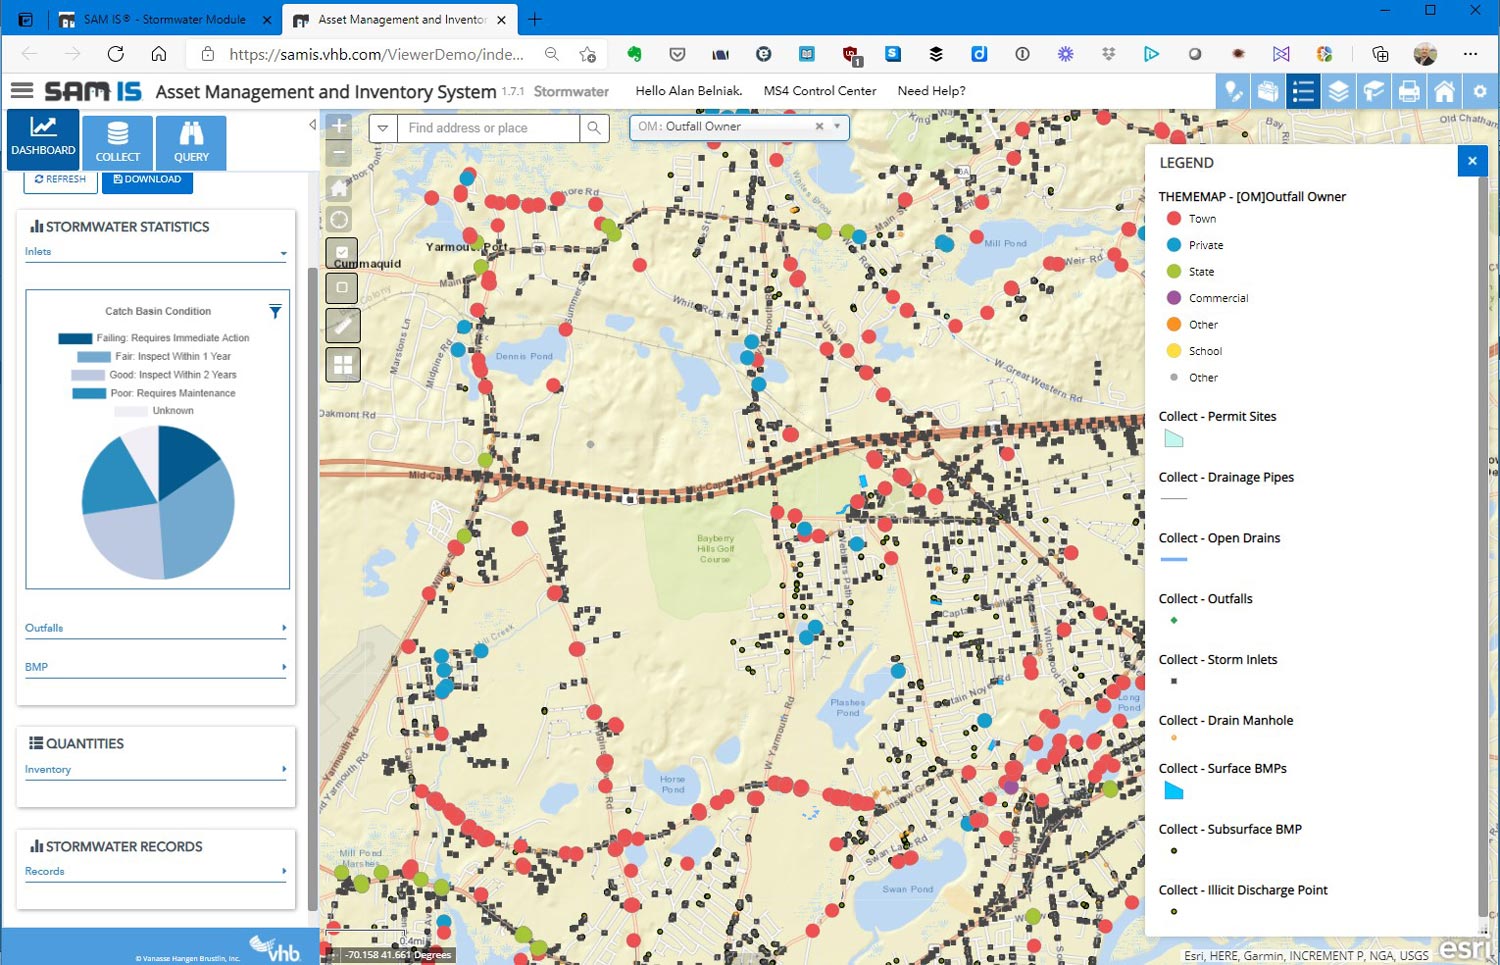 The module can be used to understand and manage your stormwater inventory.